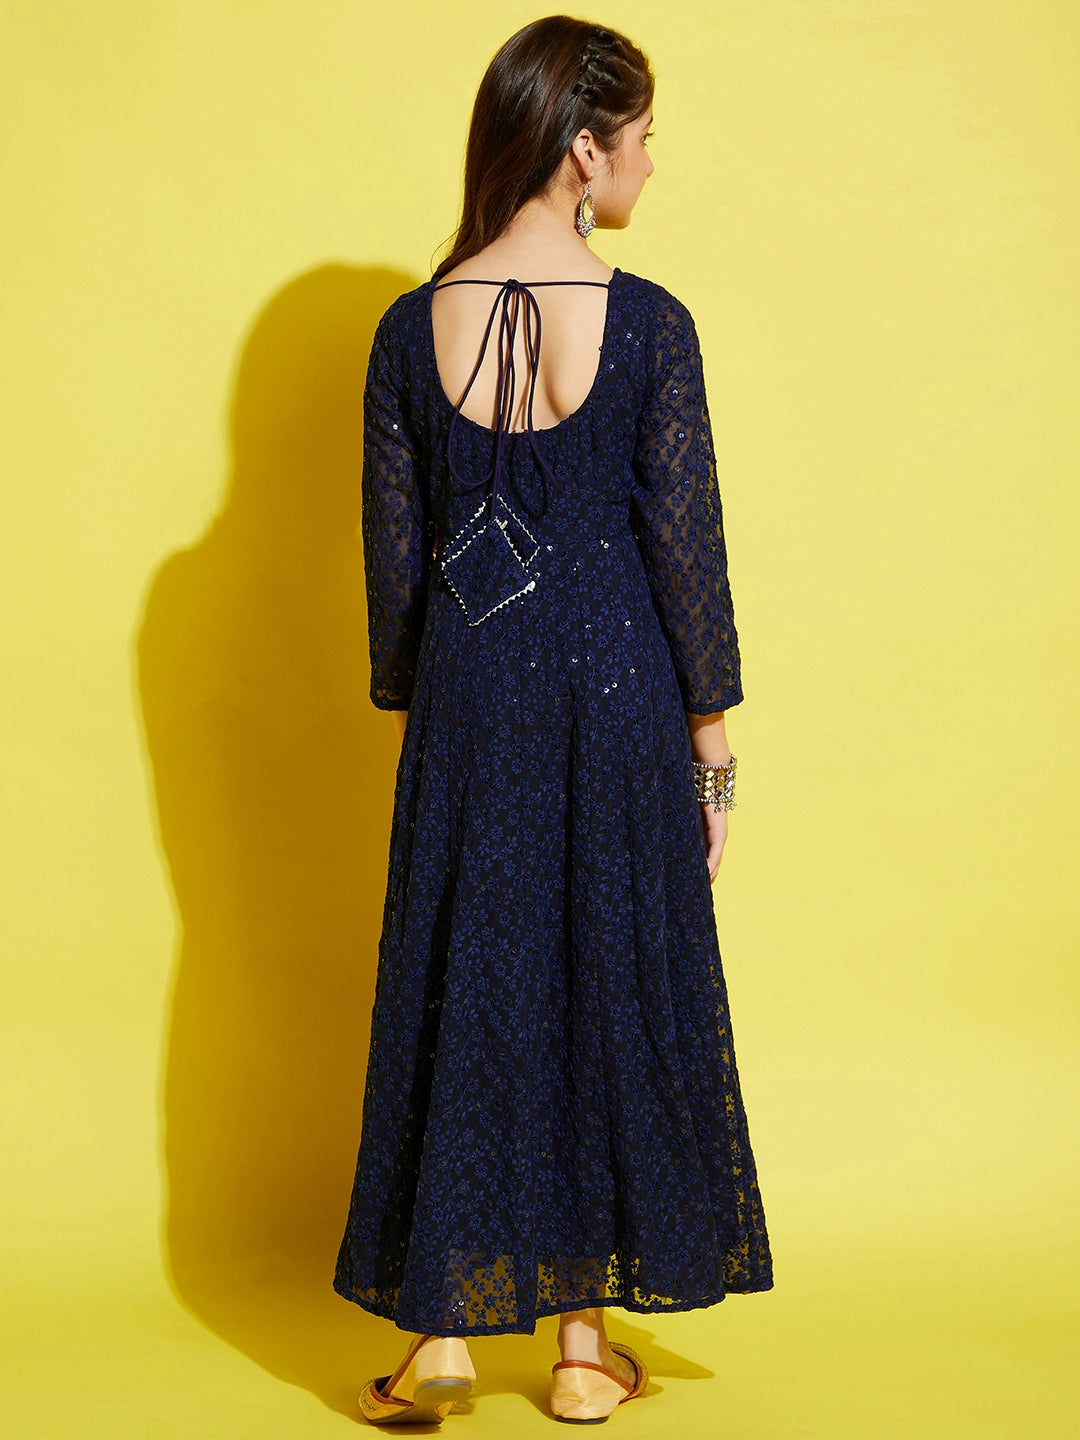 Girls Floral Embroided Maxi Dress - Navy Blue